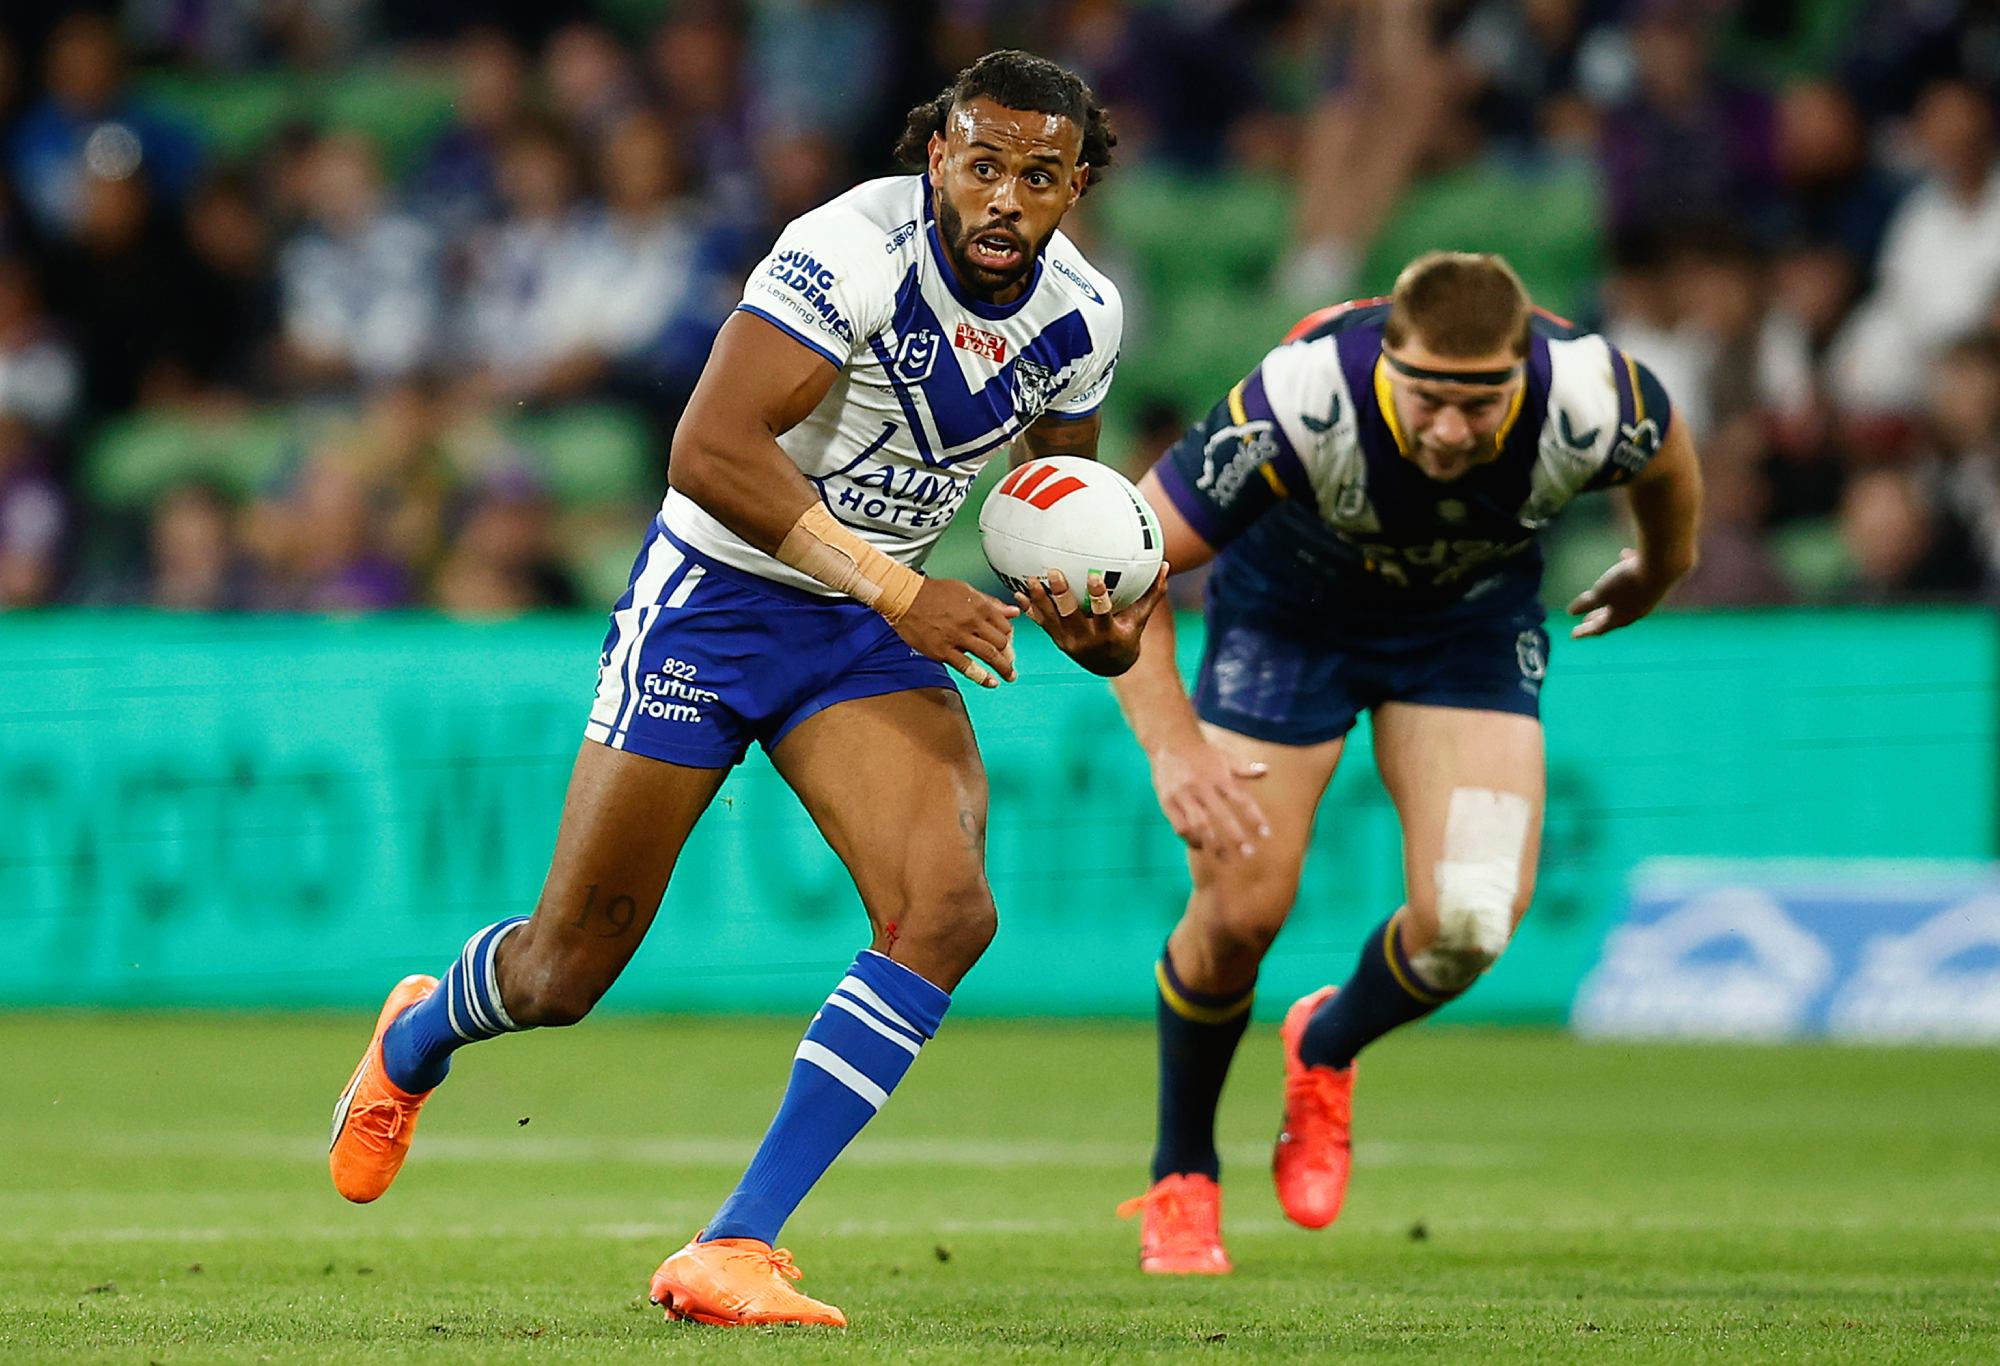 MELBOURNE, AUSTRALIA - MARCH 11: Josh Addo-Carr of the Bulldogs runs with the ball during the round two NRL match between the Melbourne Storm and Canterbury Bulldogs at AAMI Park on March 11, 2023 in Melbourne, Australia. (Photo by Daniel Pockett/Getty Images)